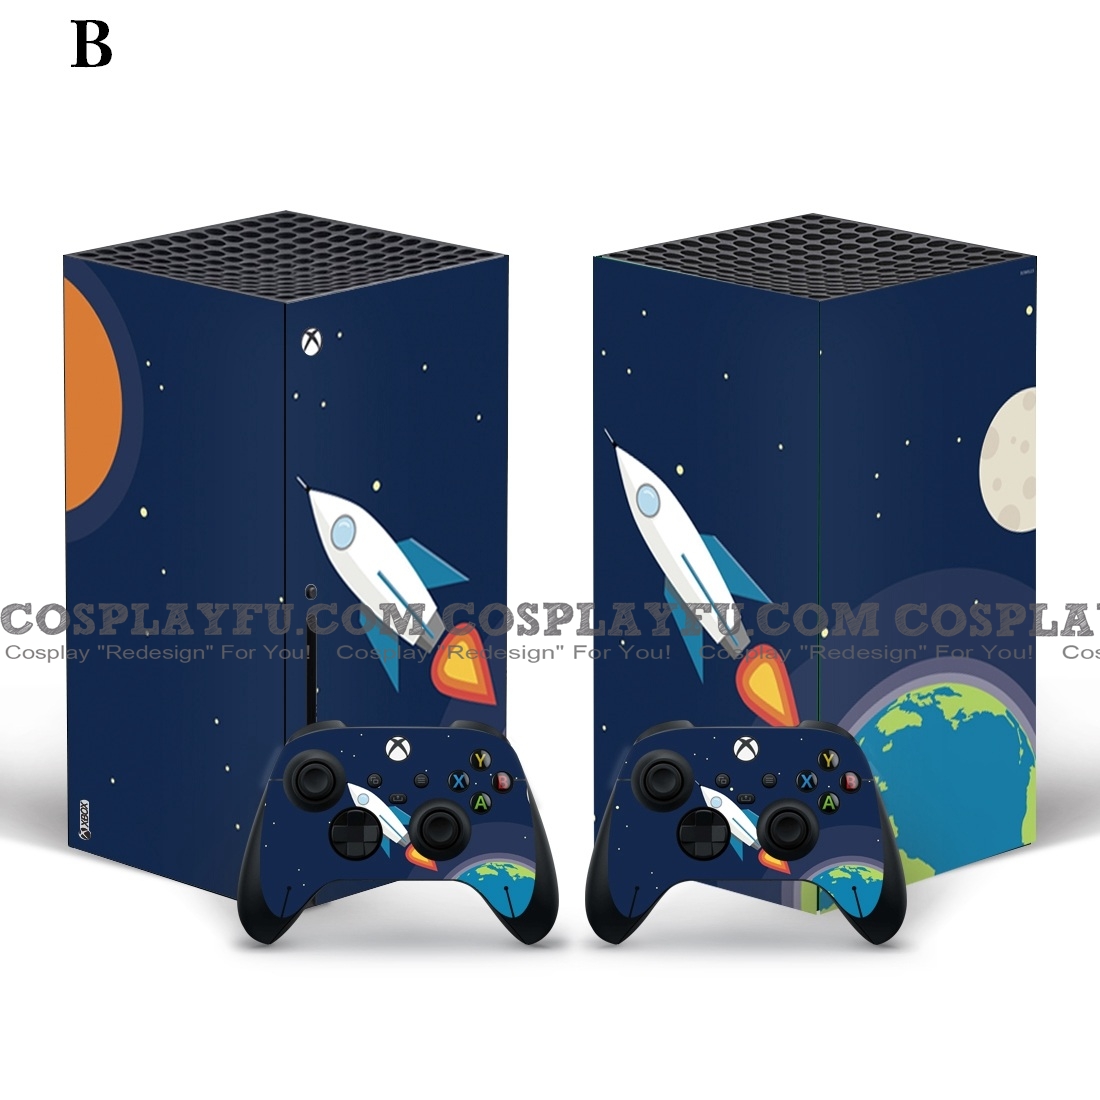 Space Skin Decal Für Xbox Series X Console And Controller, Voll Wrap Vinyl Cosplay